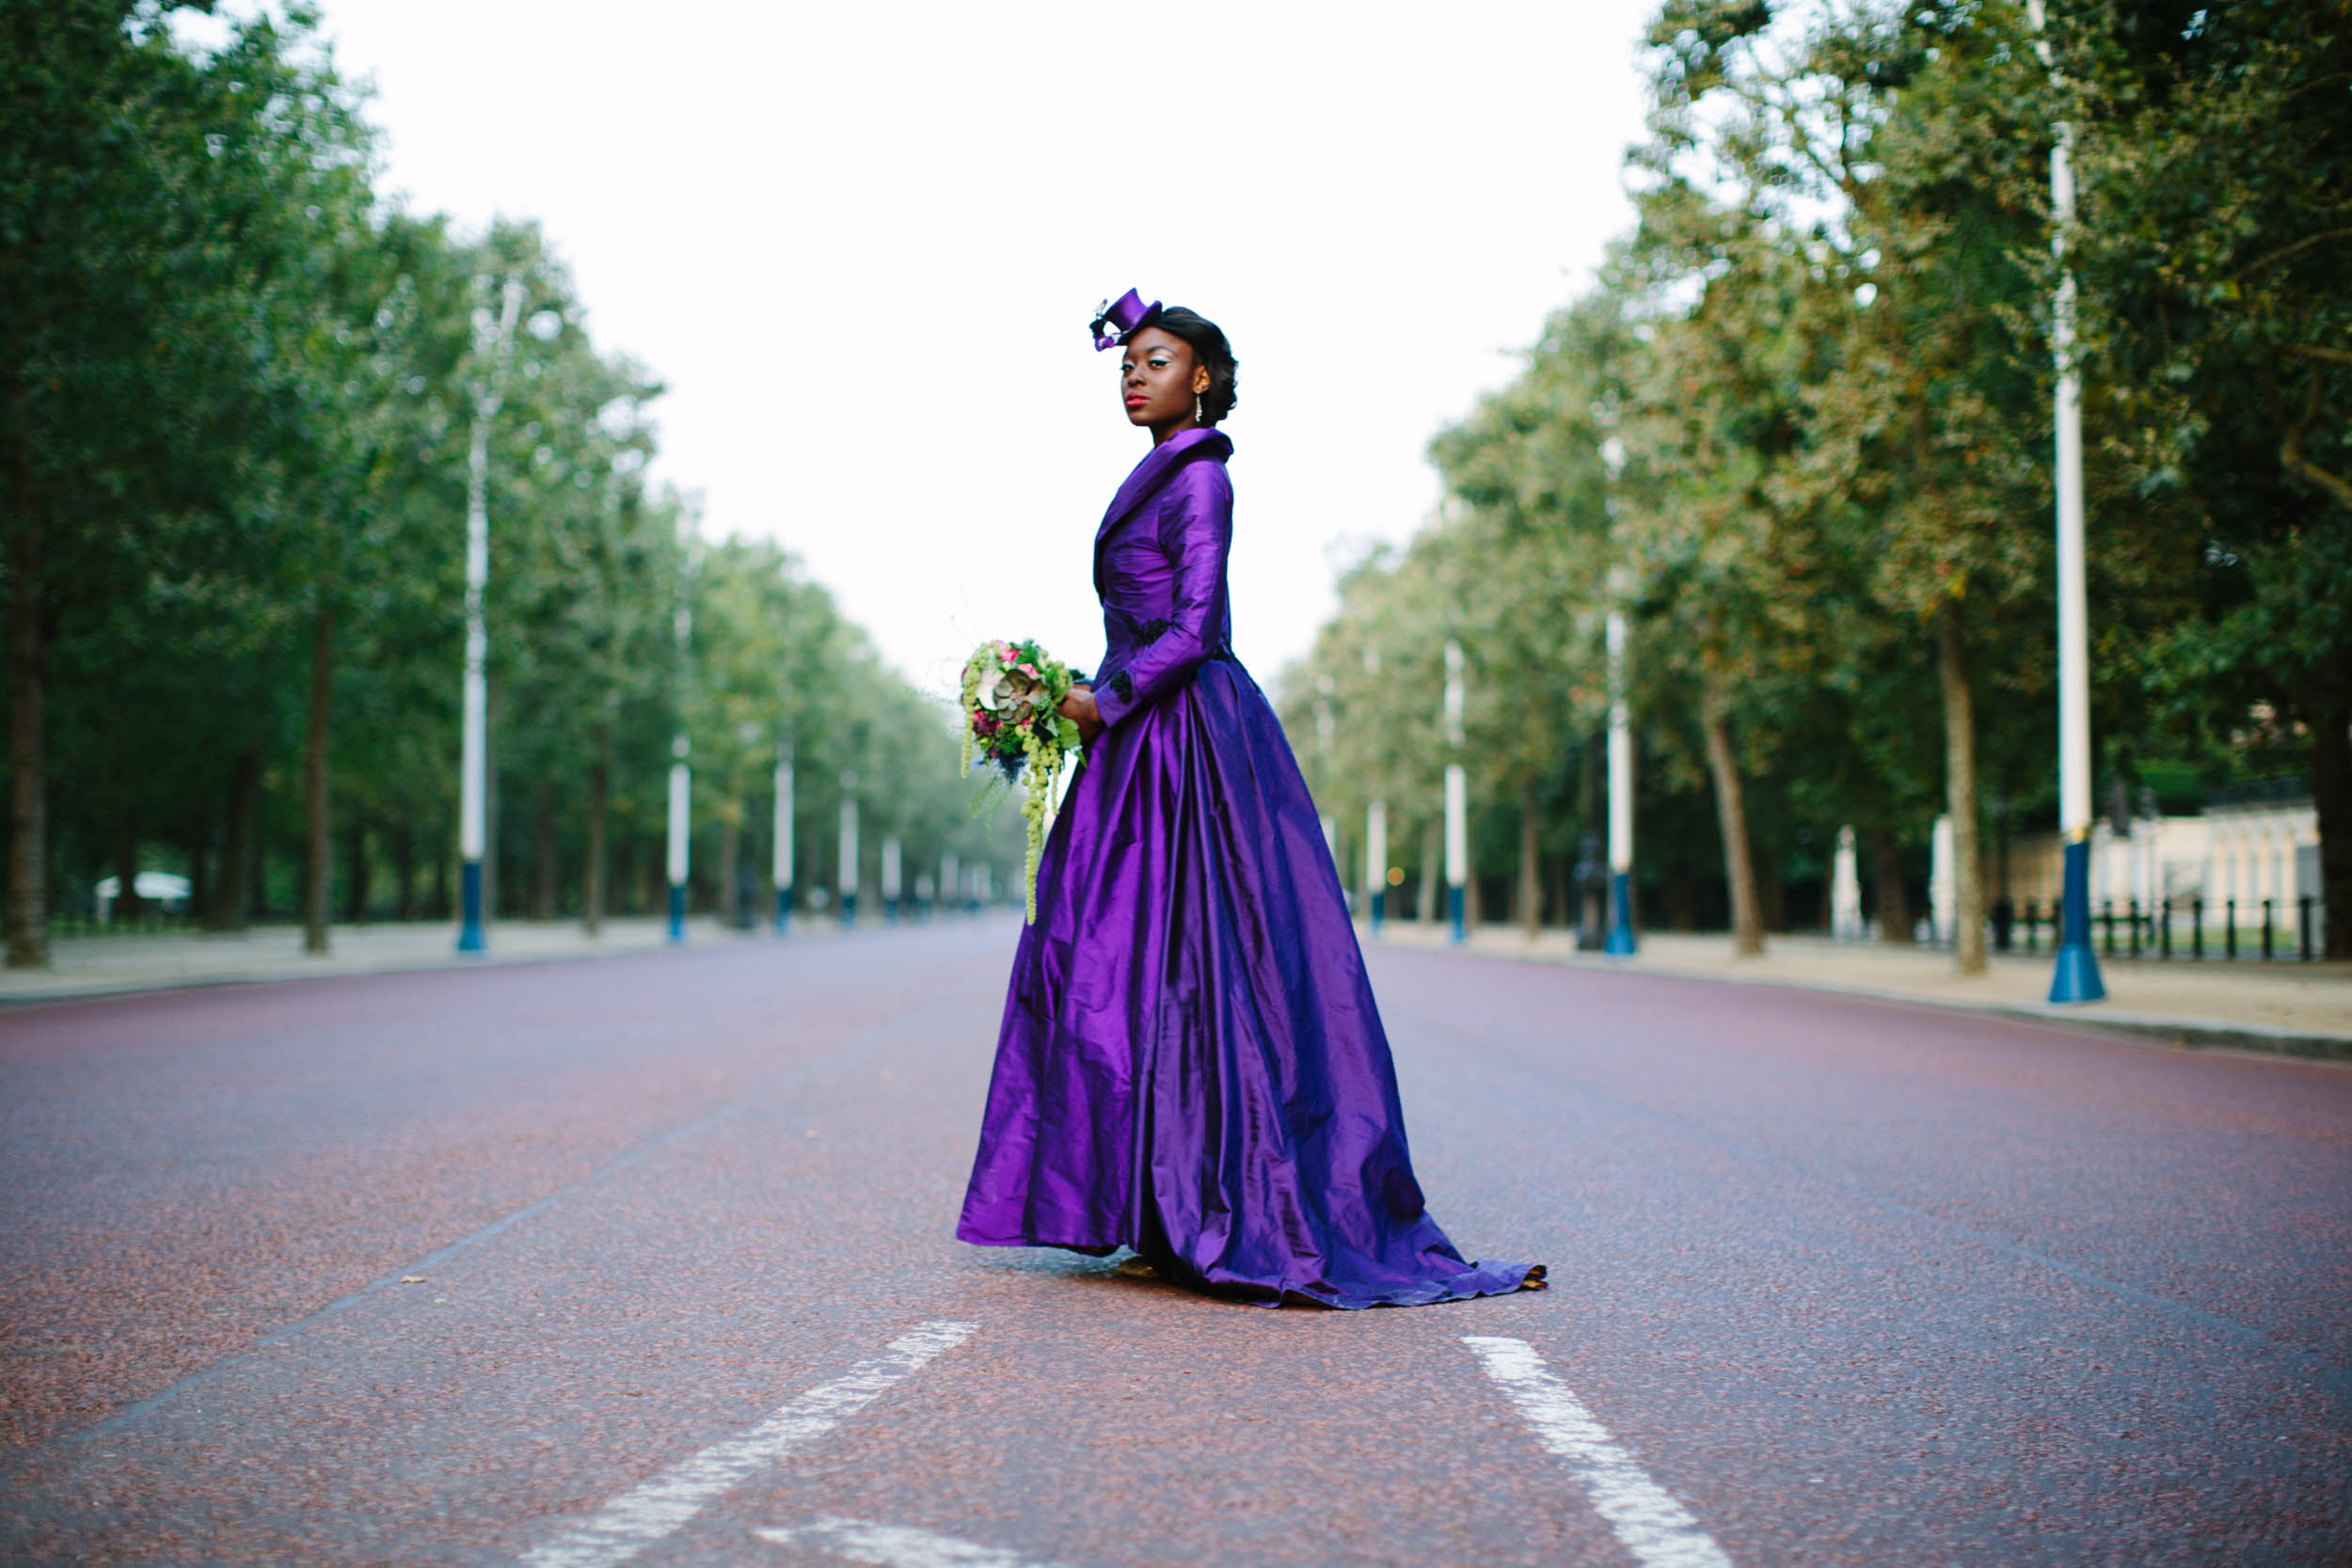 This Purple Wedding Dress is WOW! ⋆ Unconventional Wedding